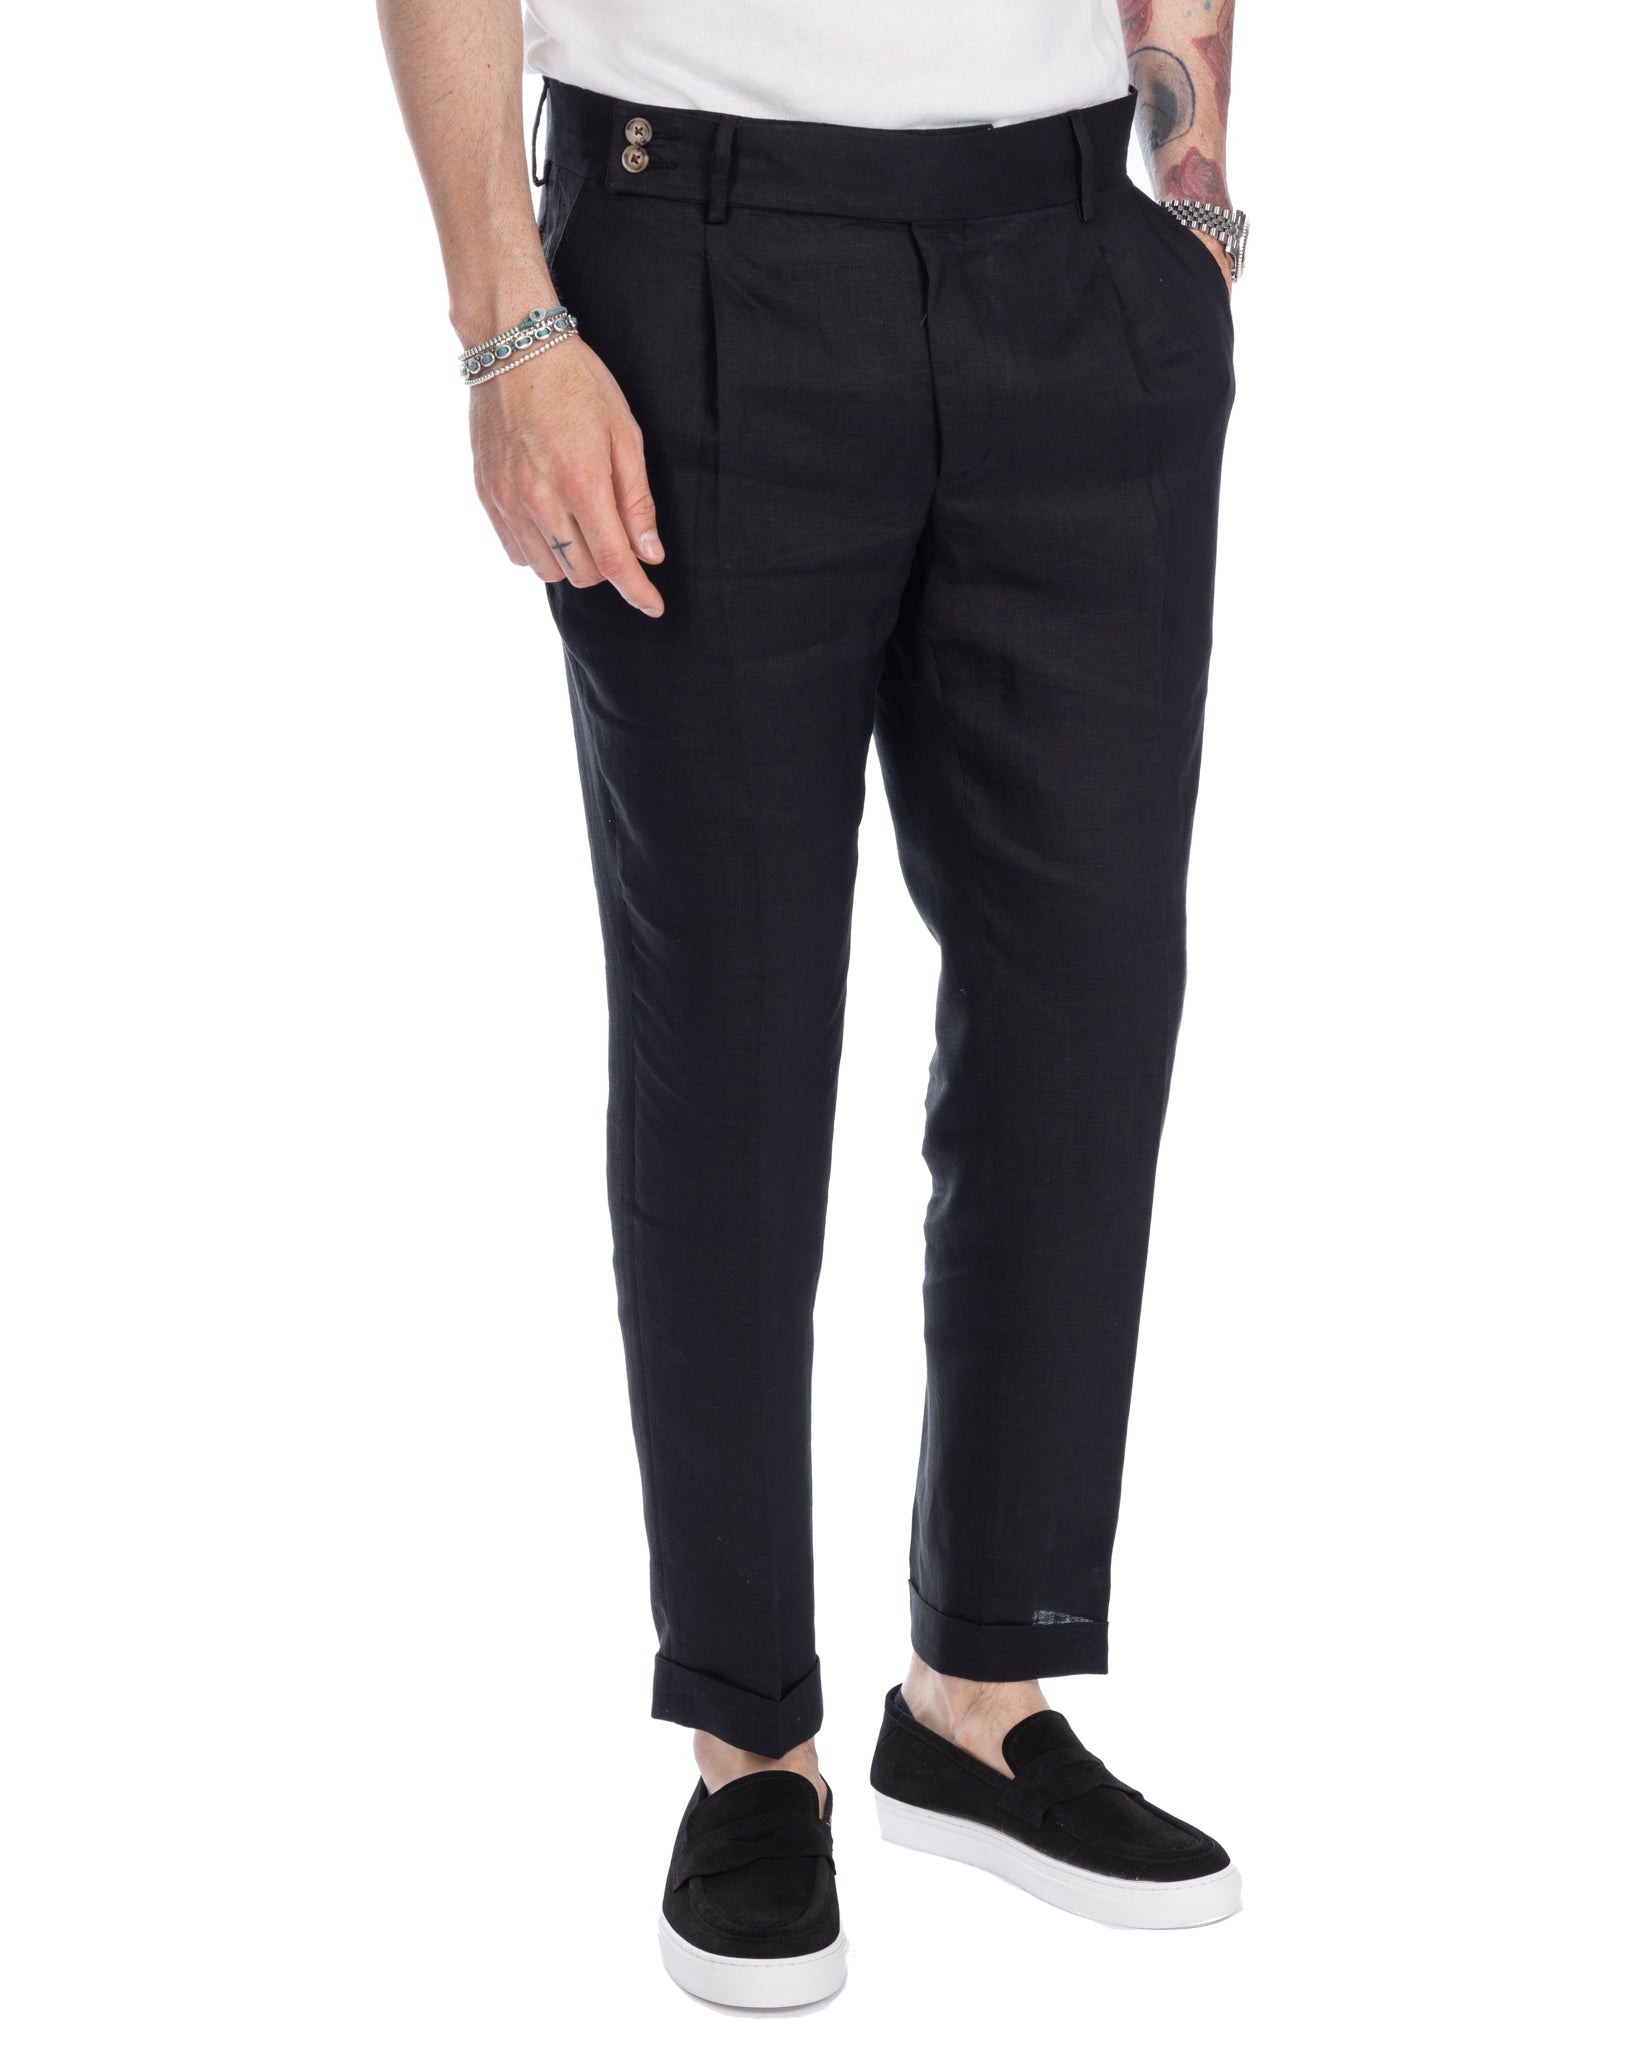 Sorso - black high-waisted trousers in pure linen